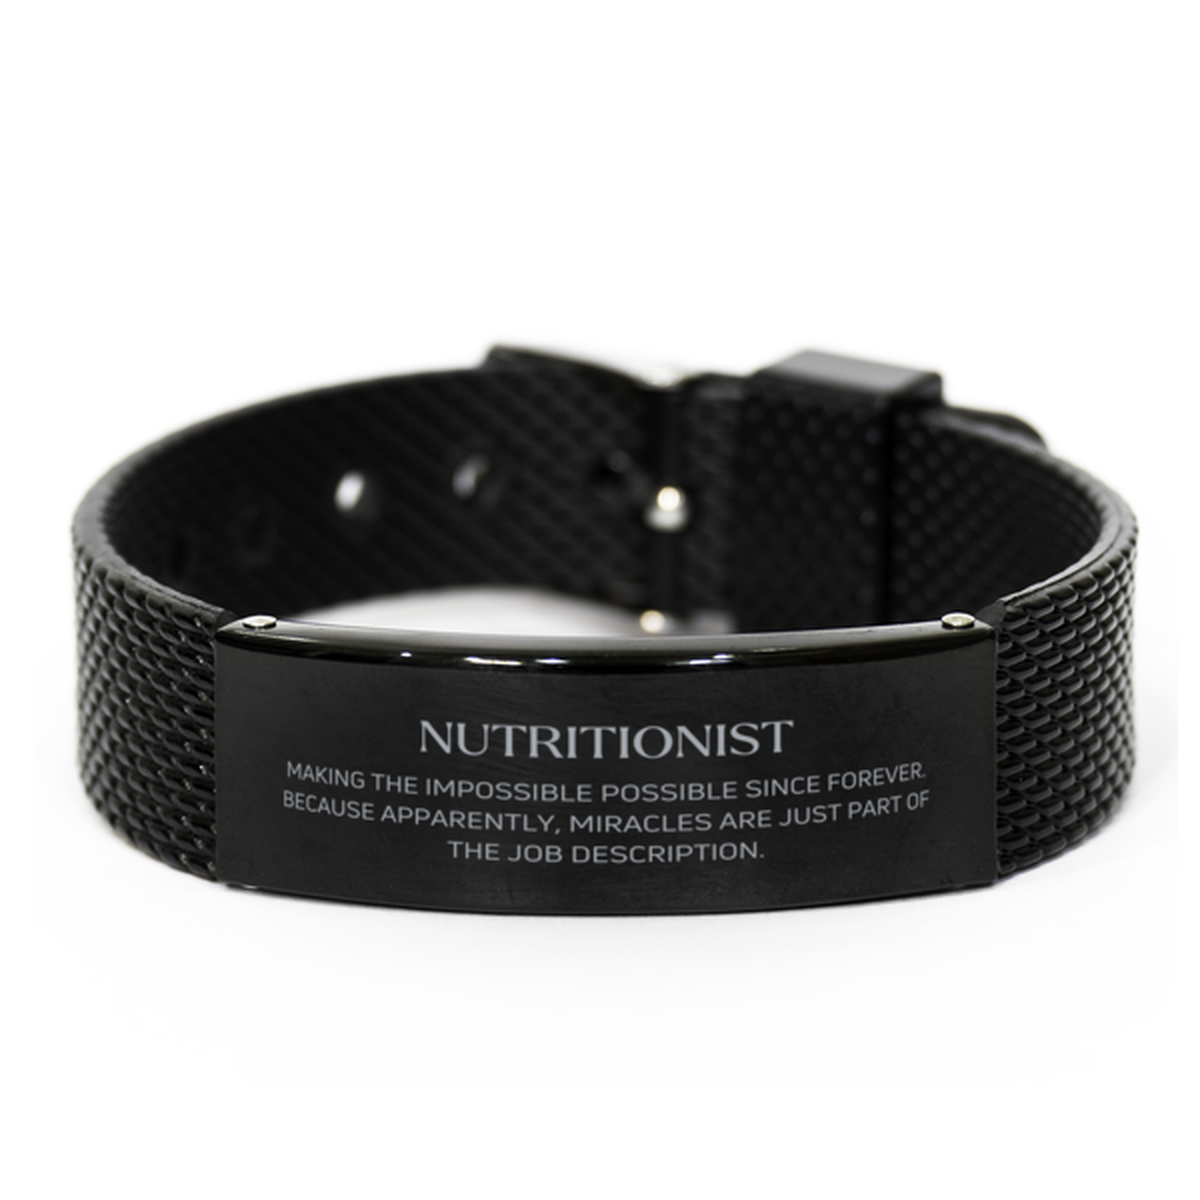 Funny Nutritionist Gifts, Miracles are just part of the job description, Inspirational Birthday Black Shark Mesh Bracelet For Nutritionist, Men, Women, Coworkers, Friends, Boss